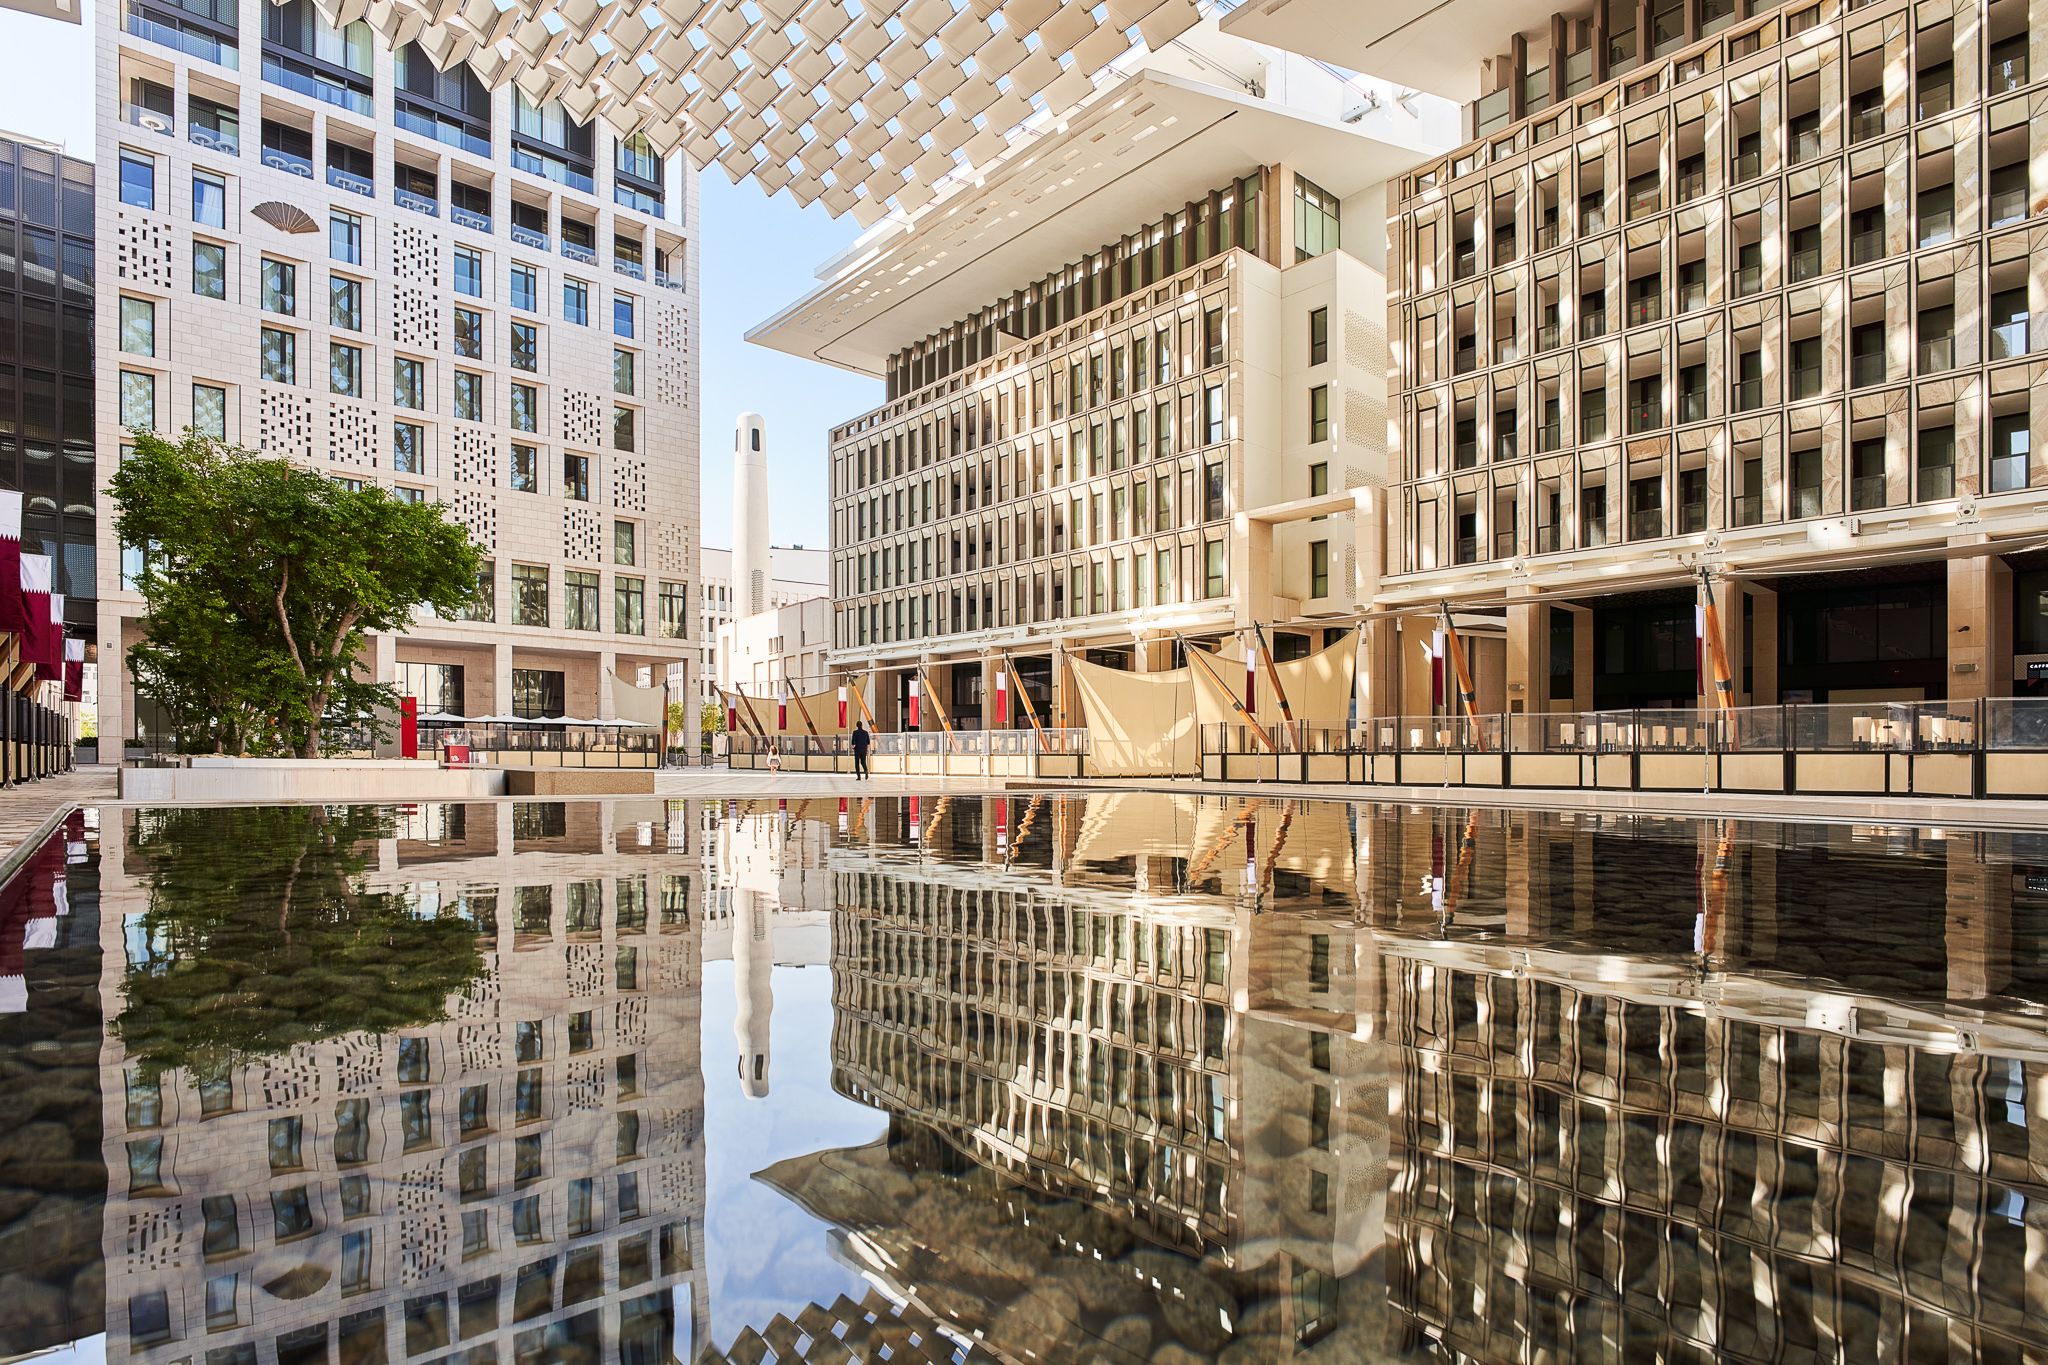 A courtyard in Msheireb Downtown Doha. A reflecting pool in the foreground is surrounded by multi-storey buildings with modern architecture. Sun shades are suspended above the courtyard. A minaret is visible in a gap in the buildings in the far corner of the courtyard. Qatari flags hang from the fronts of the buildings. To the left of the reflective pool are a number of leafy trees in a planter.